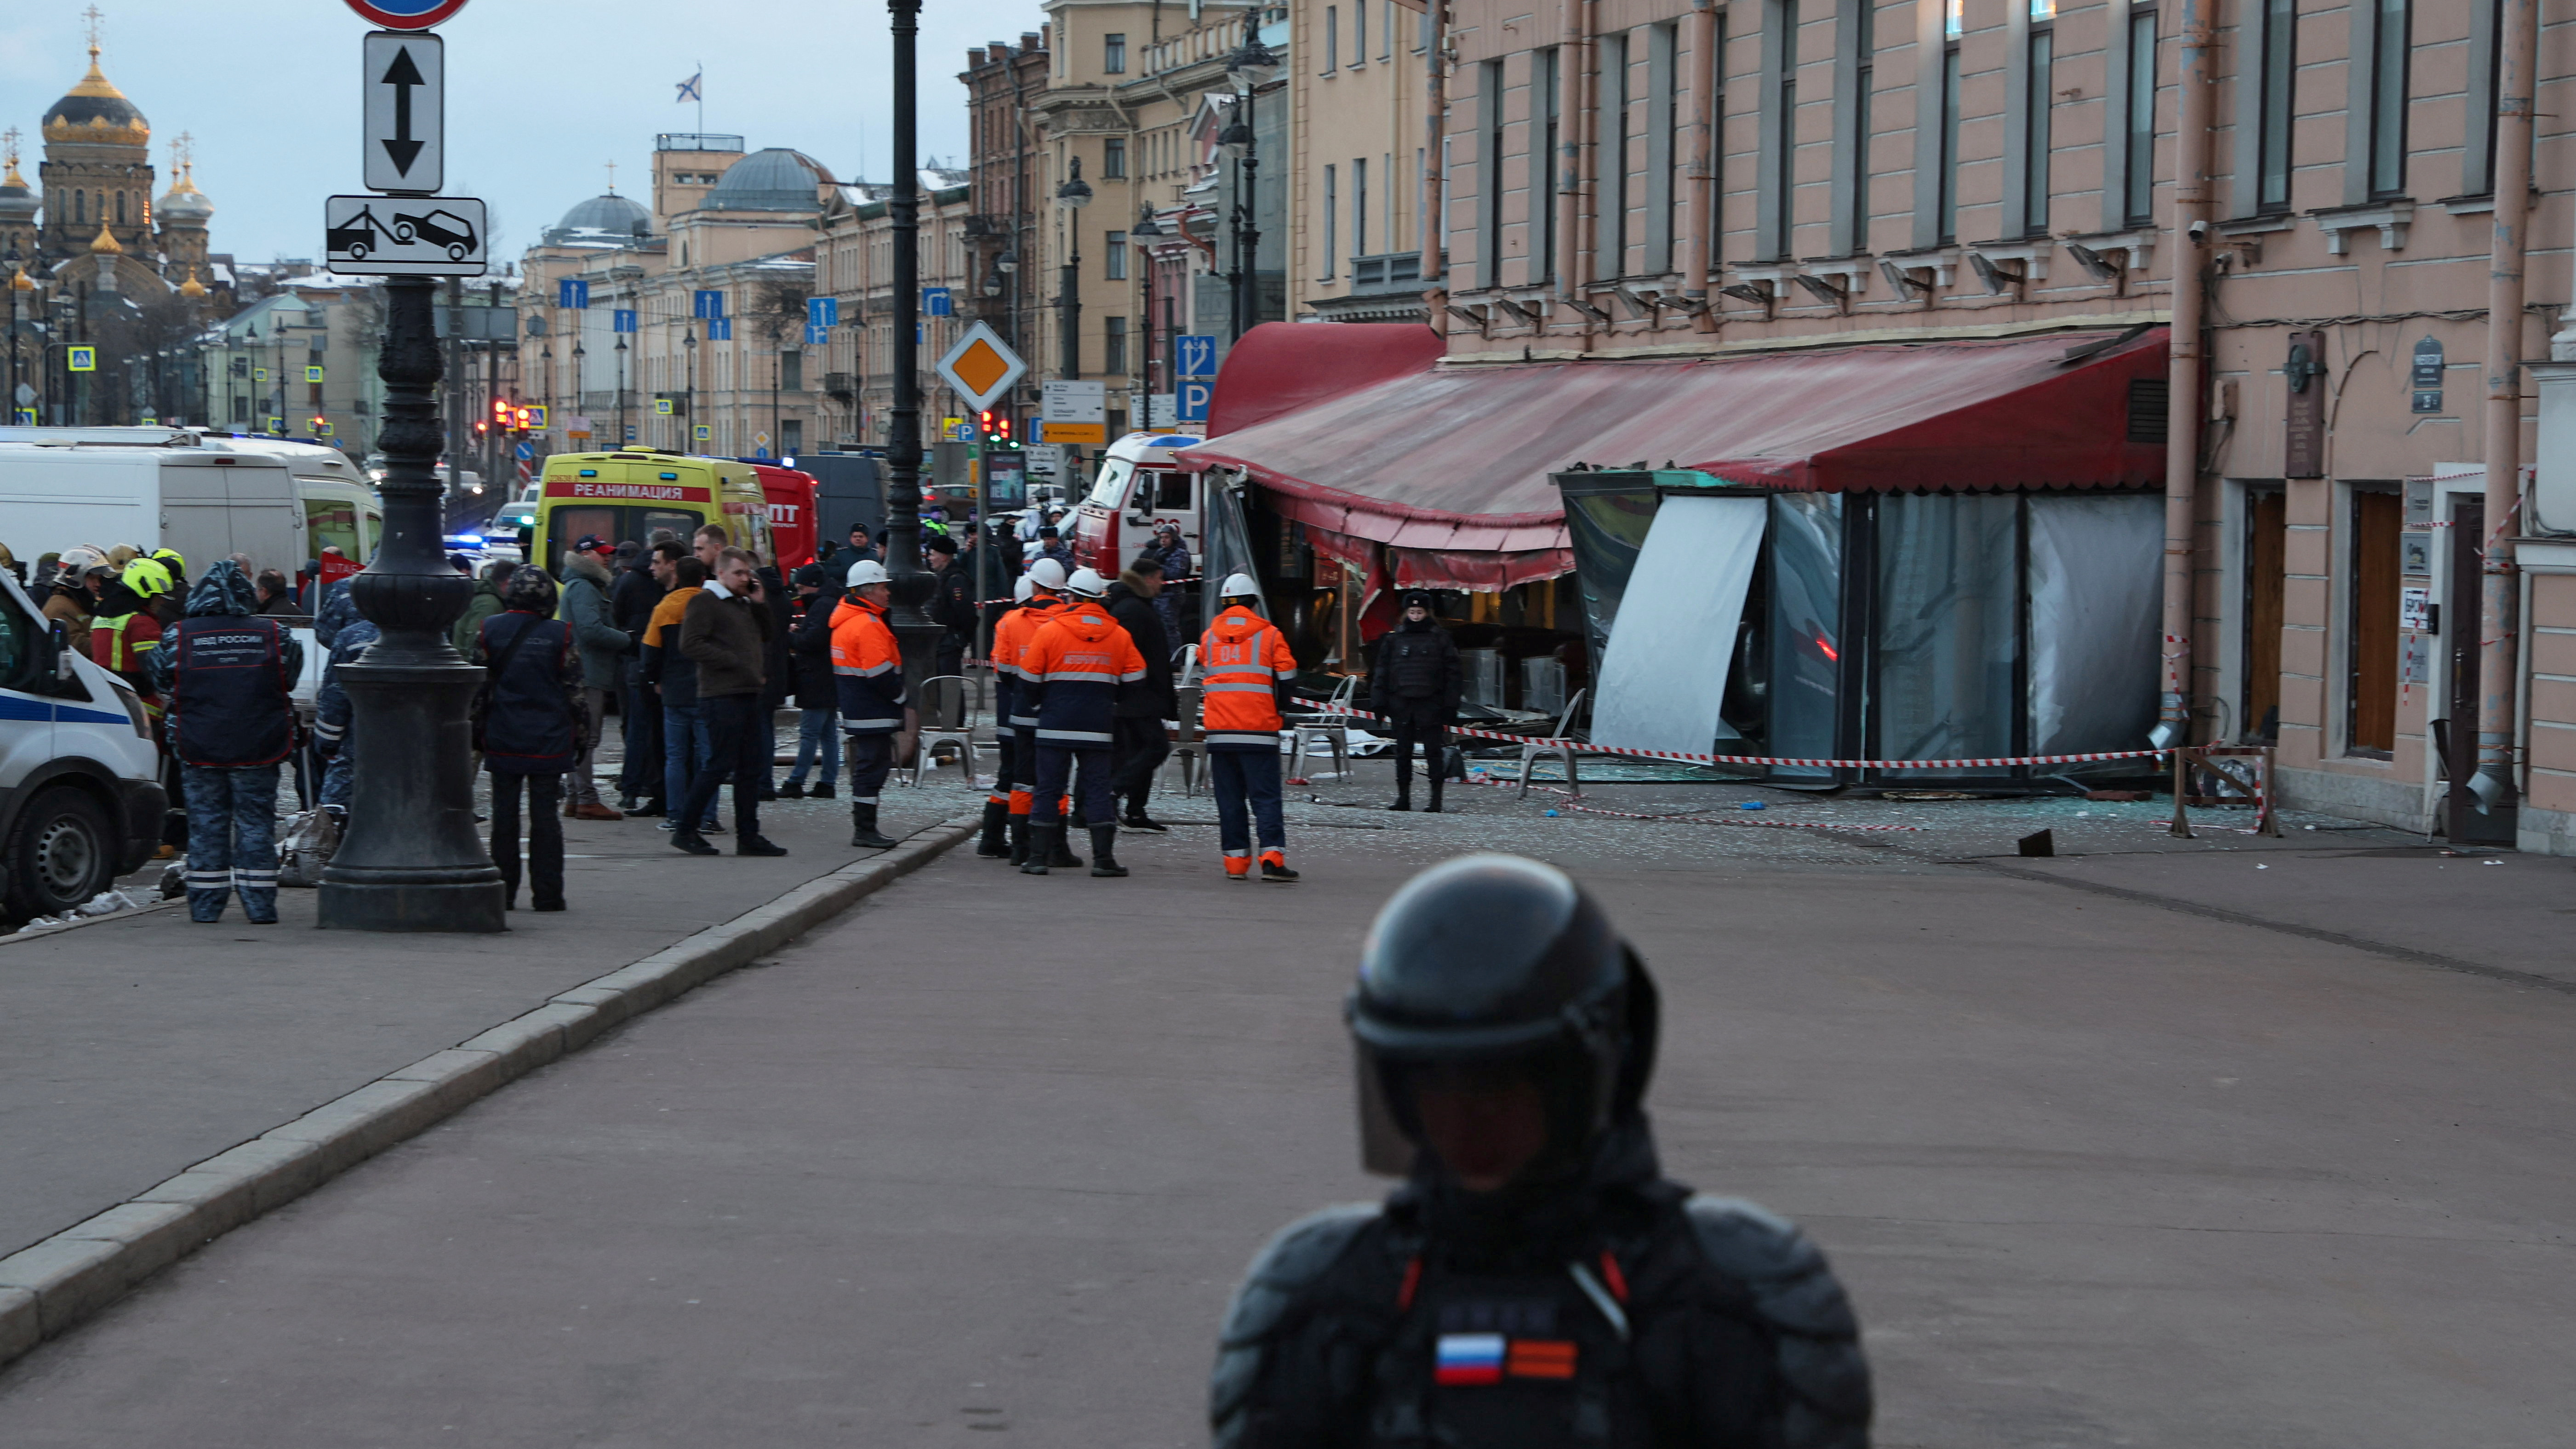 Investigators and members of emergency services work at the explosion site in Saint Petersburg. /Reuters